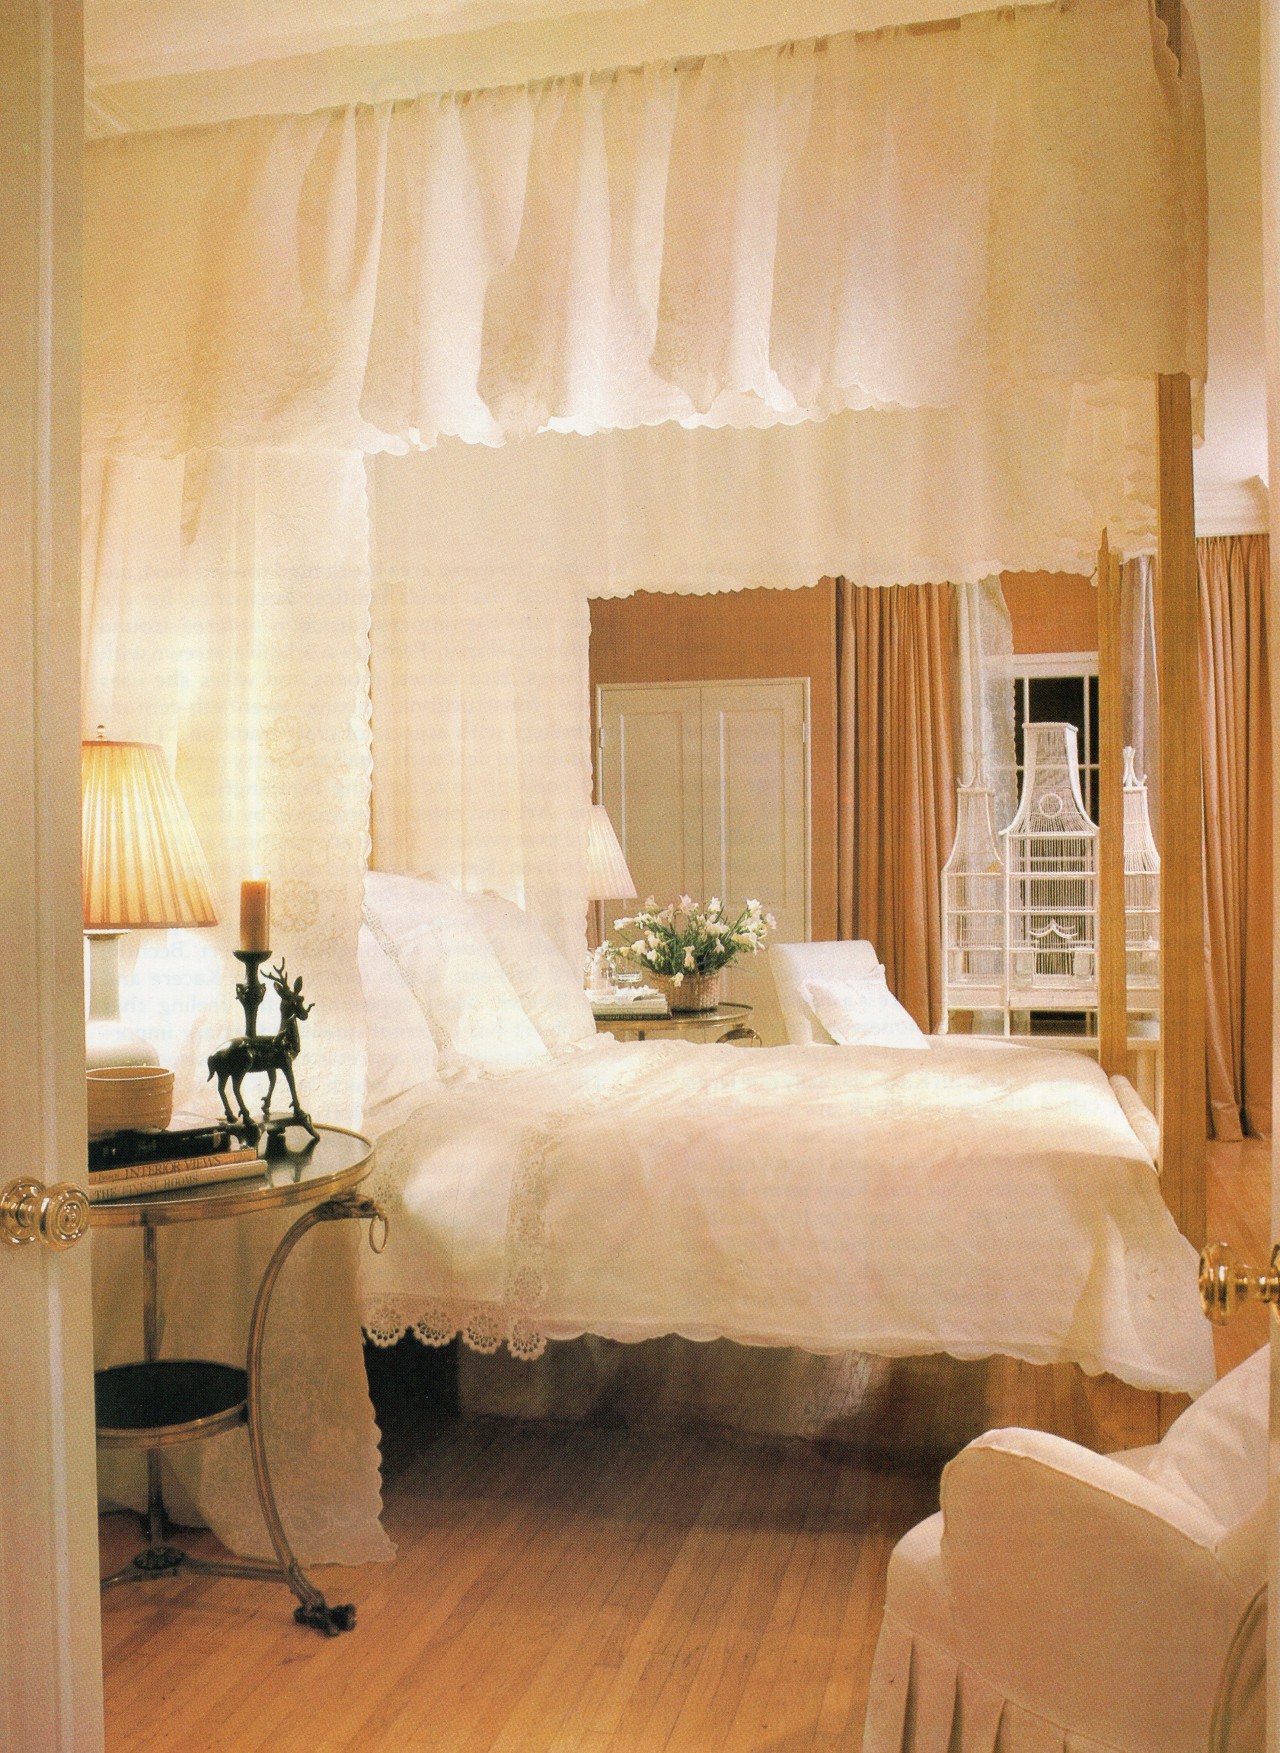 Contemporary Apartments, 1982 #vintage#vintage interior#1980s#interior design#home decor#bedroom#canopy bed#lace#mustard#wall color#birdcage#gold#curtains#wood flooring#cottage#traditional#style#home#architecture